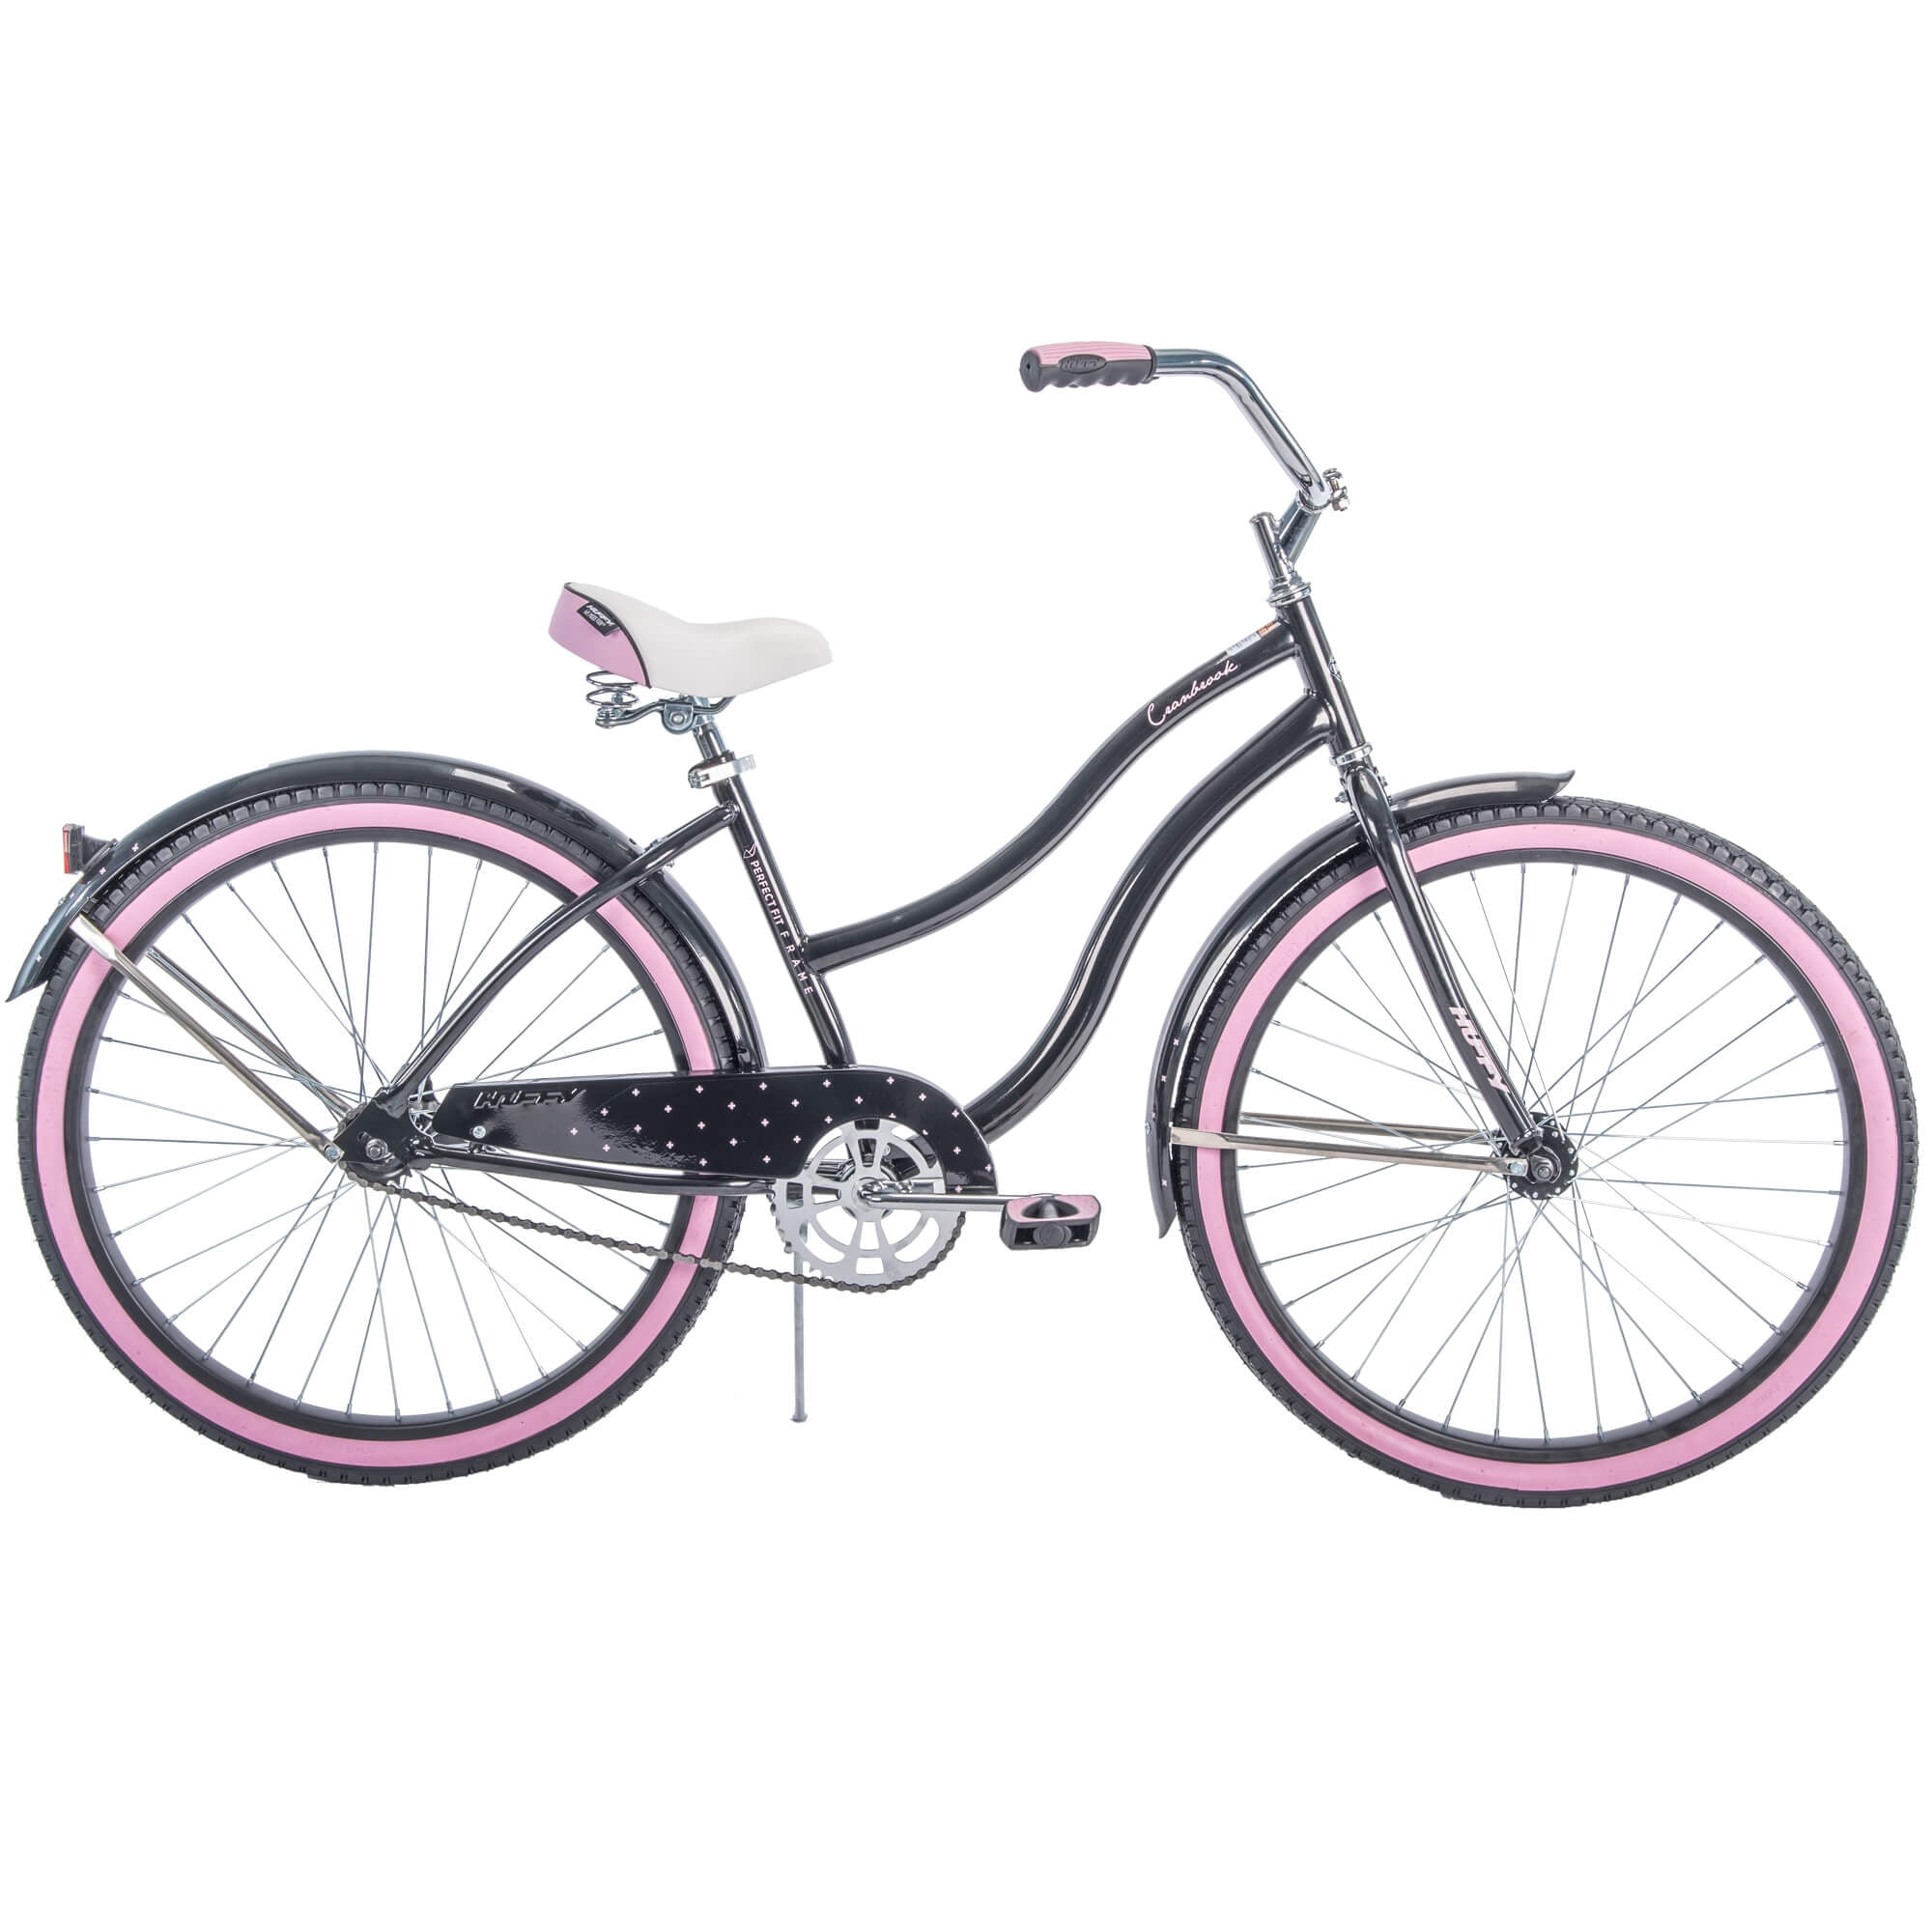 NEW Huffy 26" Cranbrook Women's Cruiser Bike with Perfect Fit Frame Black Pink 